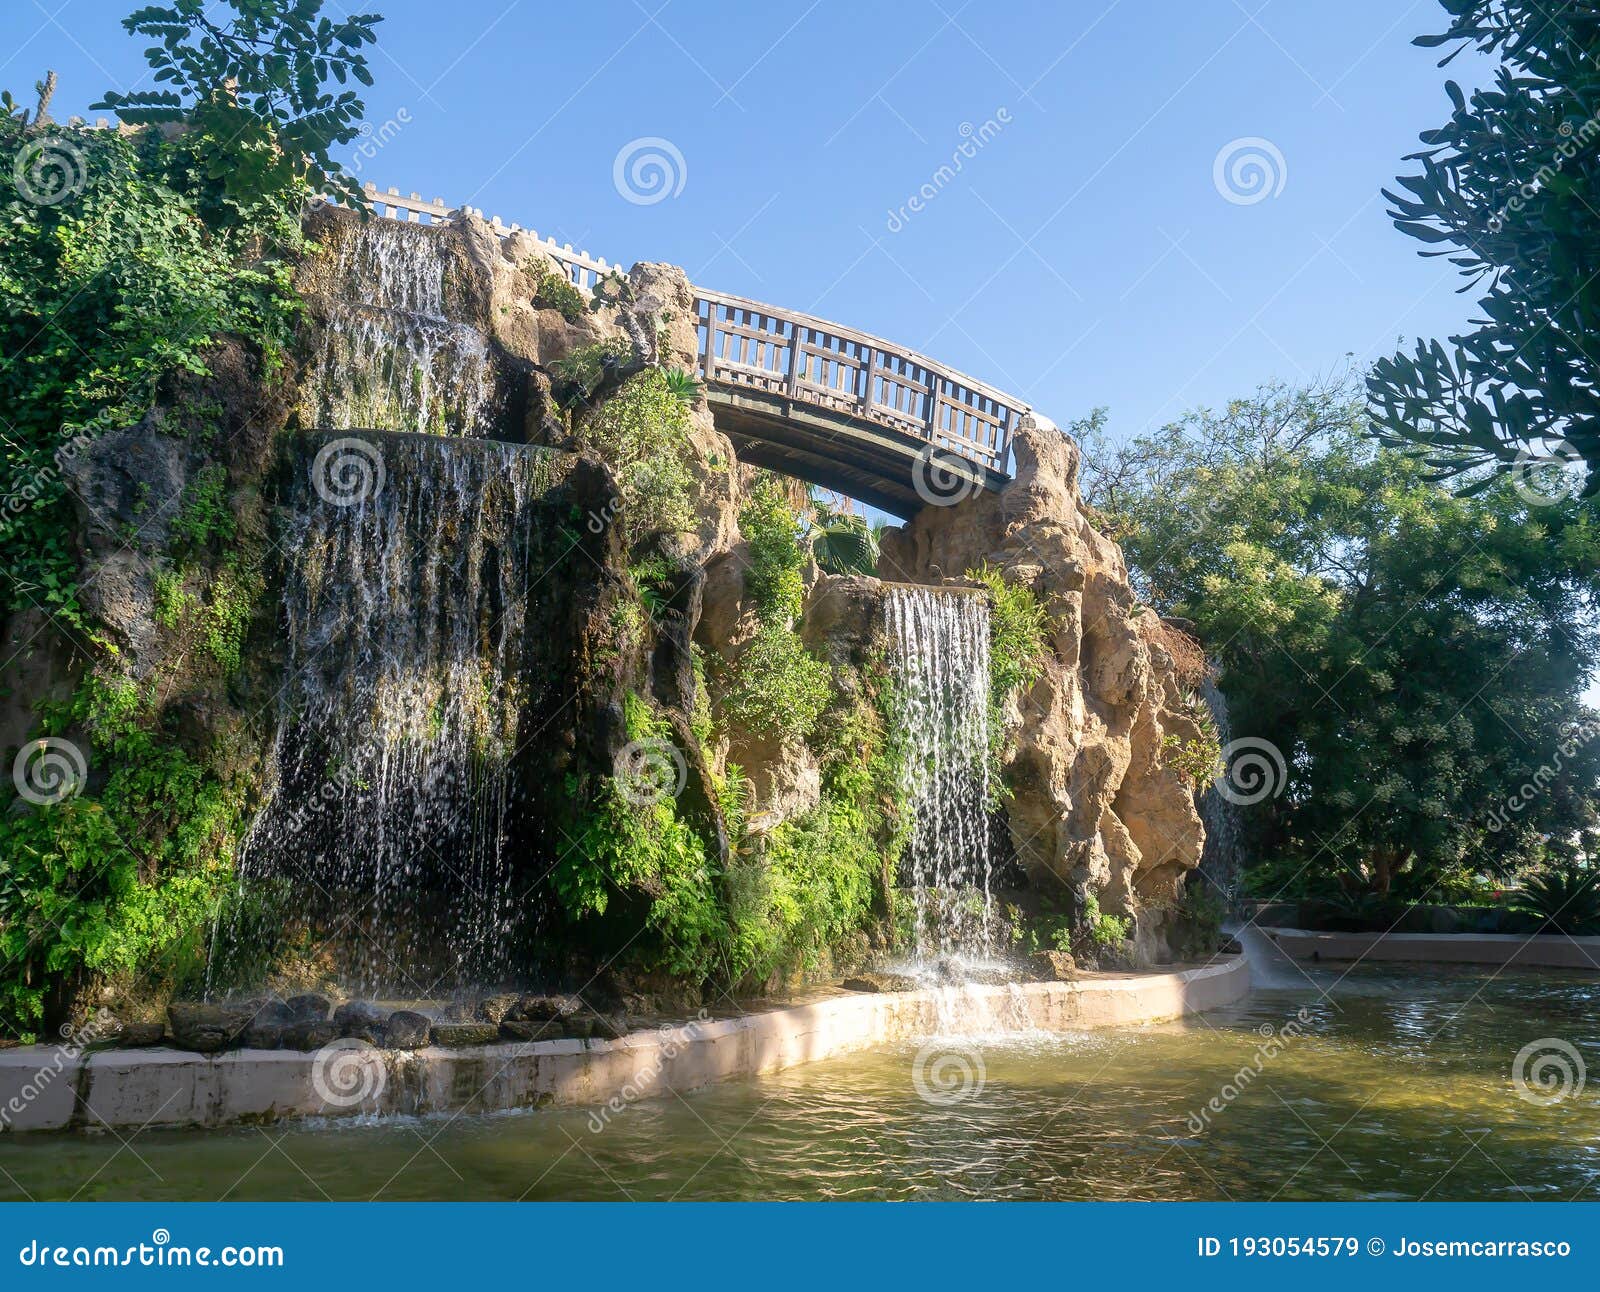 water falls in the genoves park in the bay of cadiz capital. andalusia. spain.